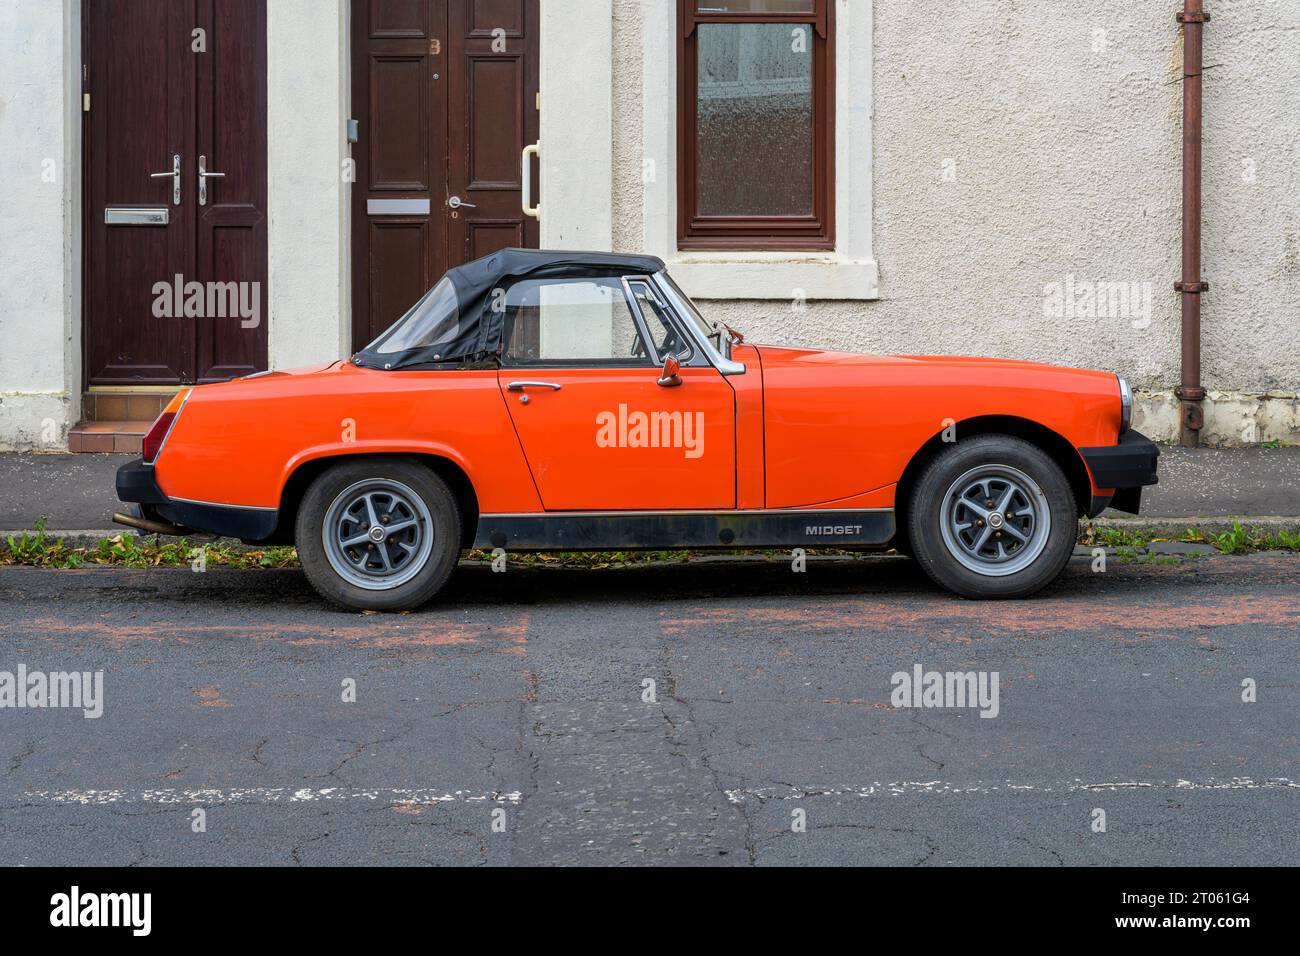 An MG Midget soft top car parked on a street, UK, Europe Stock Photo